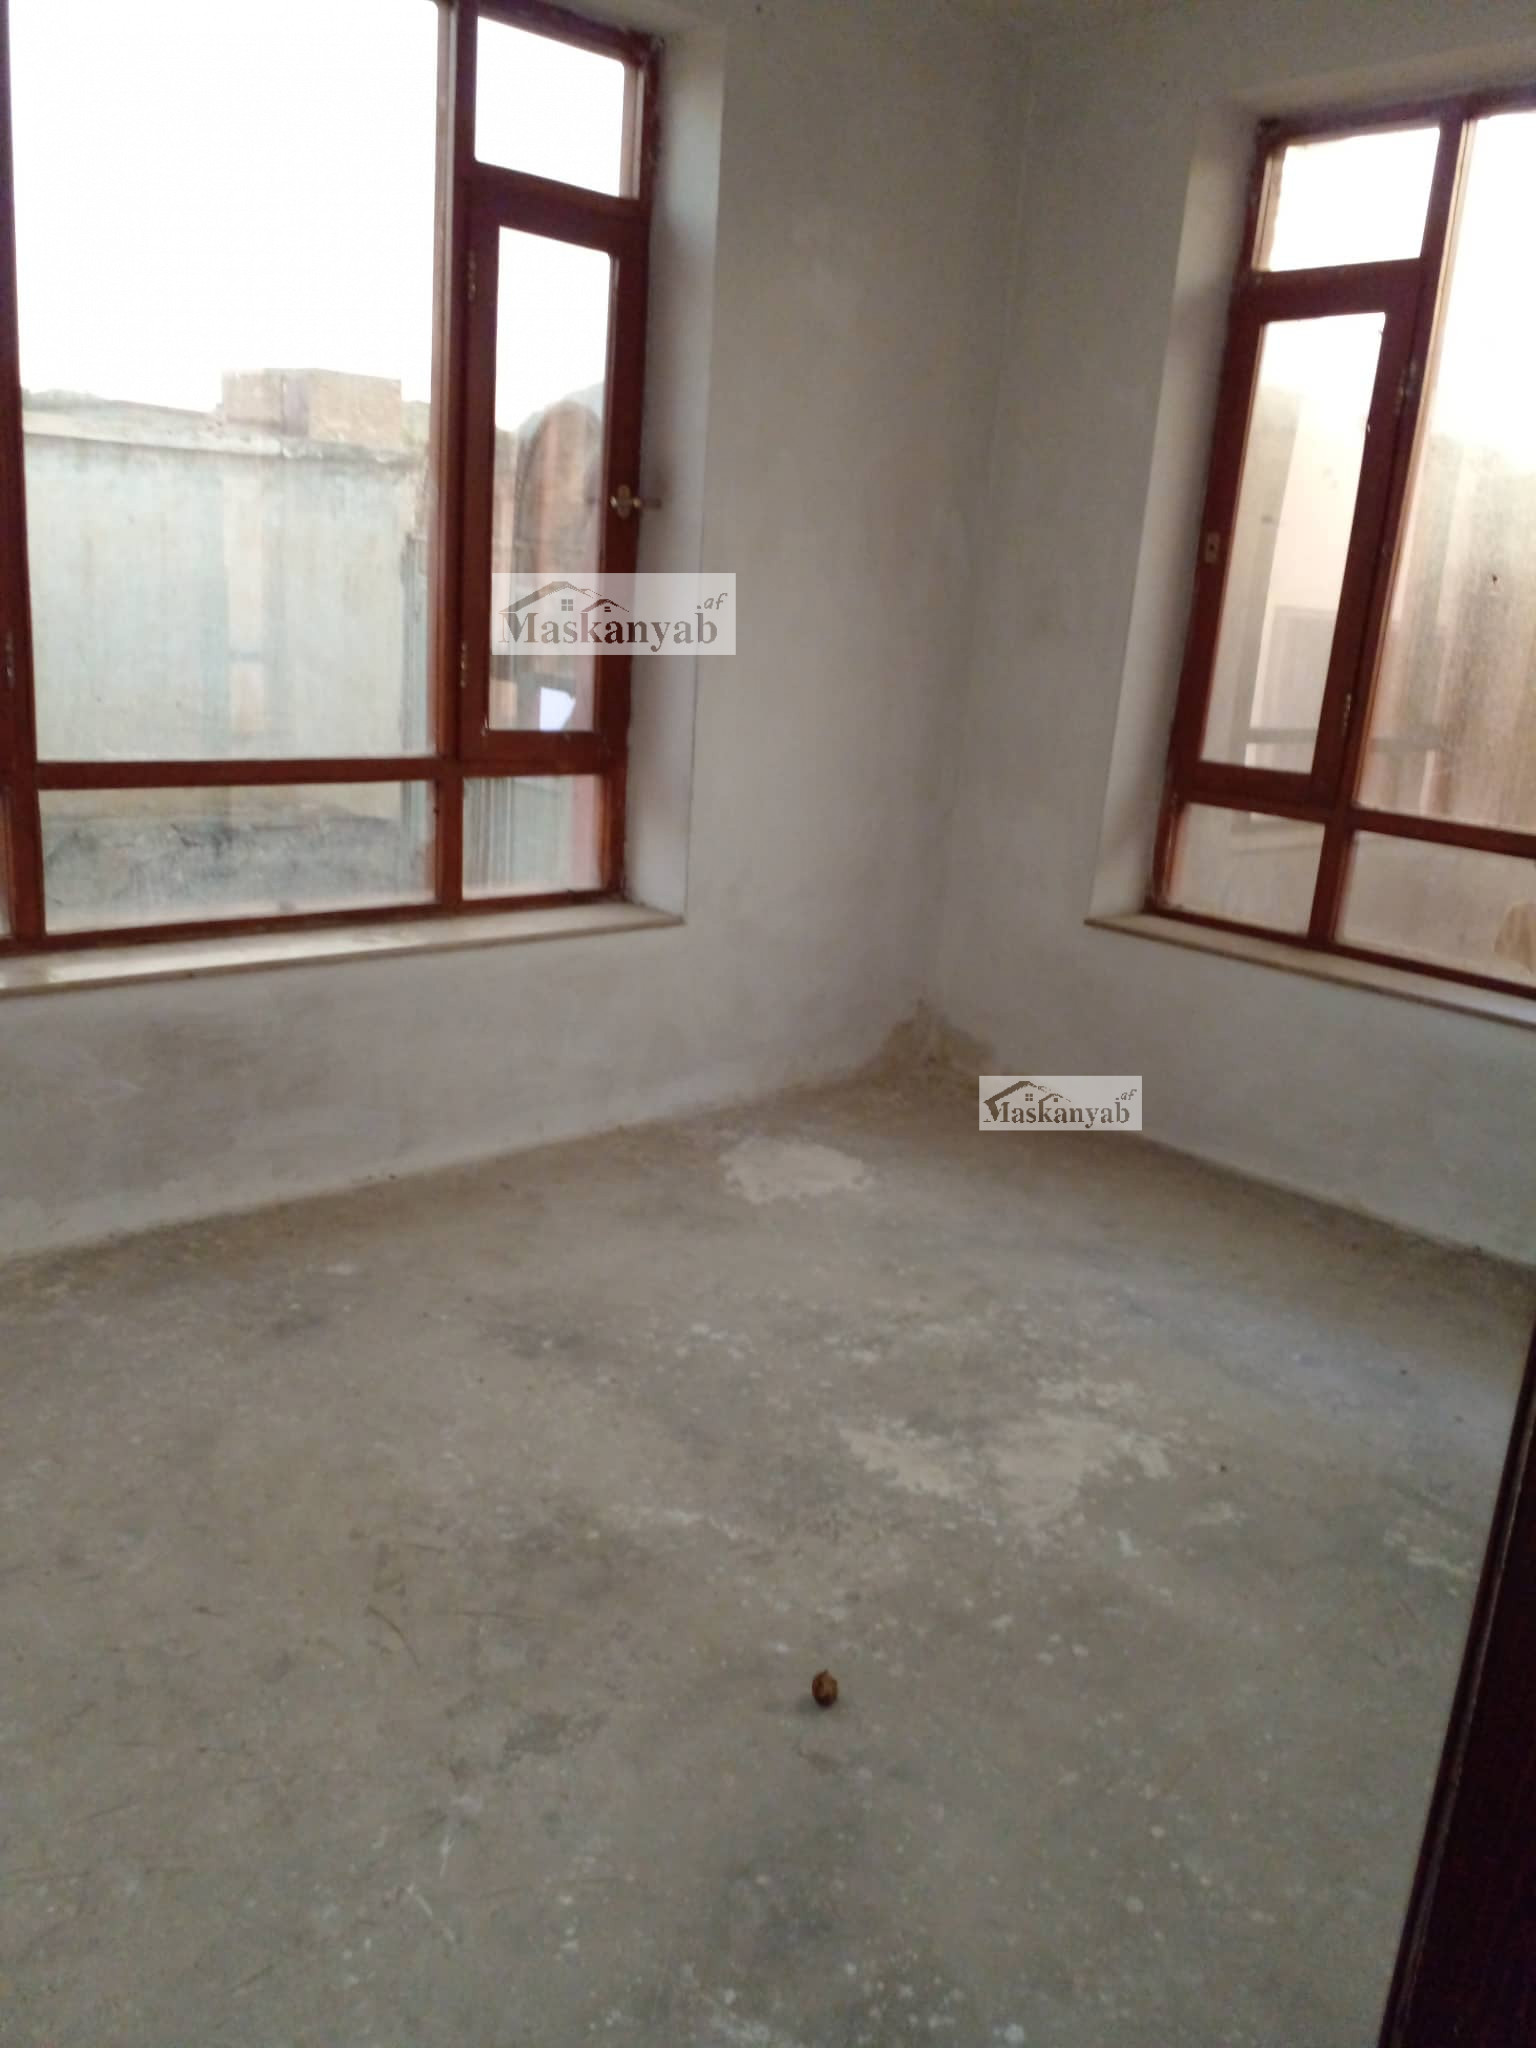 Two-floor house for sale urgently in district 6, Kabul